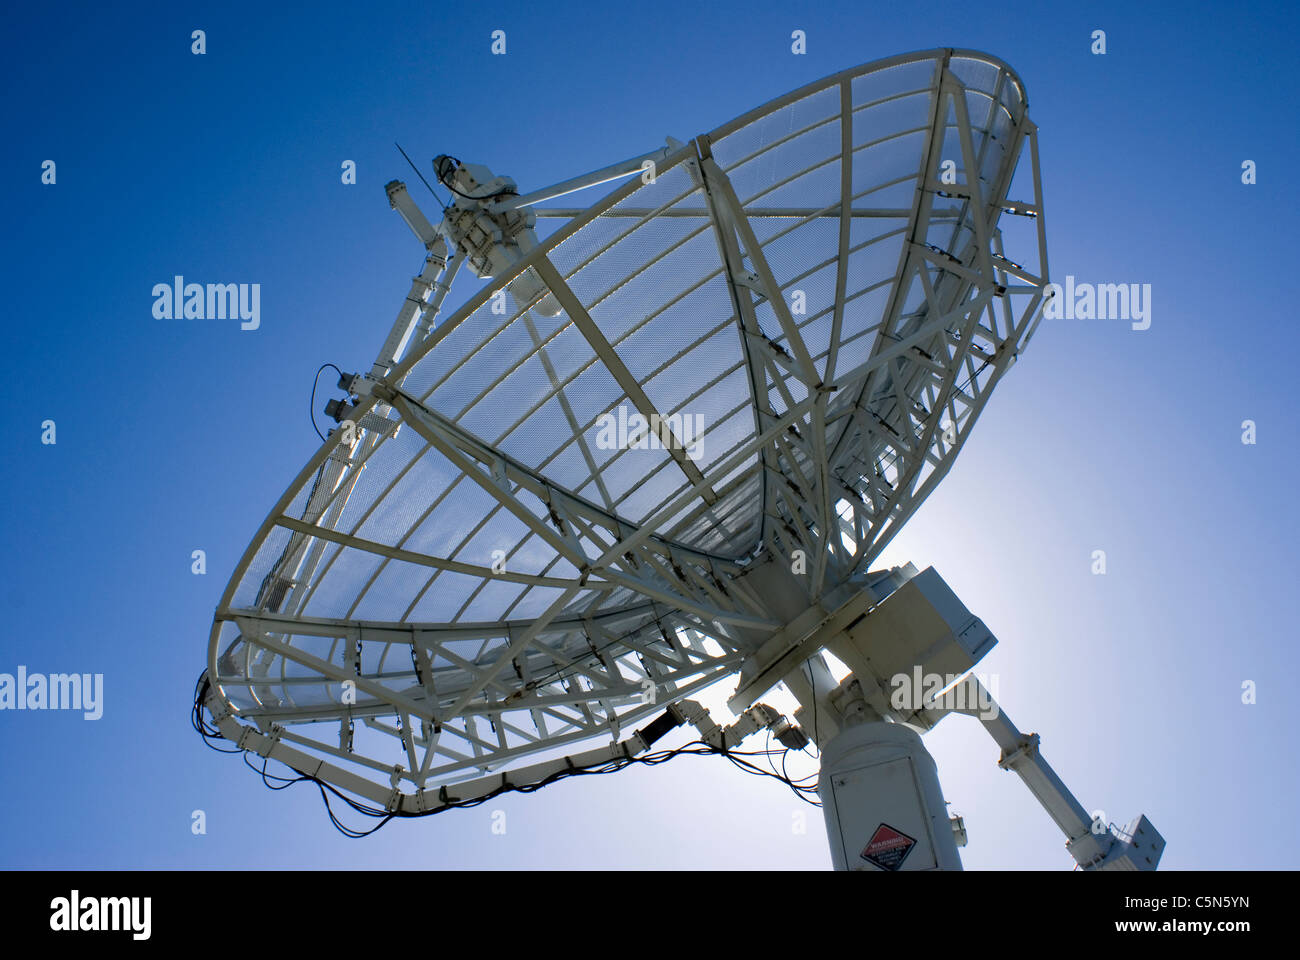 Kommunikation und Telemetrie Satellitenantenne auf Cape Canaveral Air Force Space and Missile Museum, Florida, USA Stockfoto